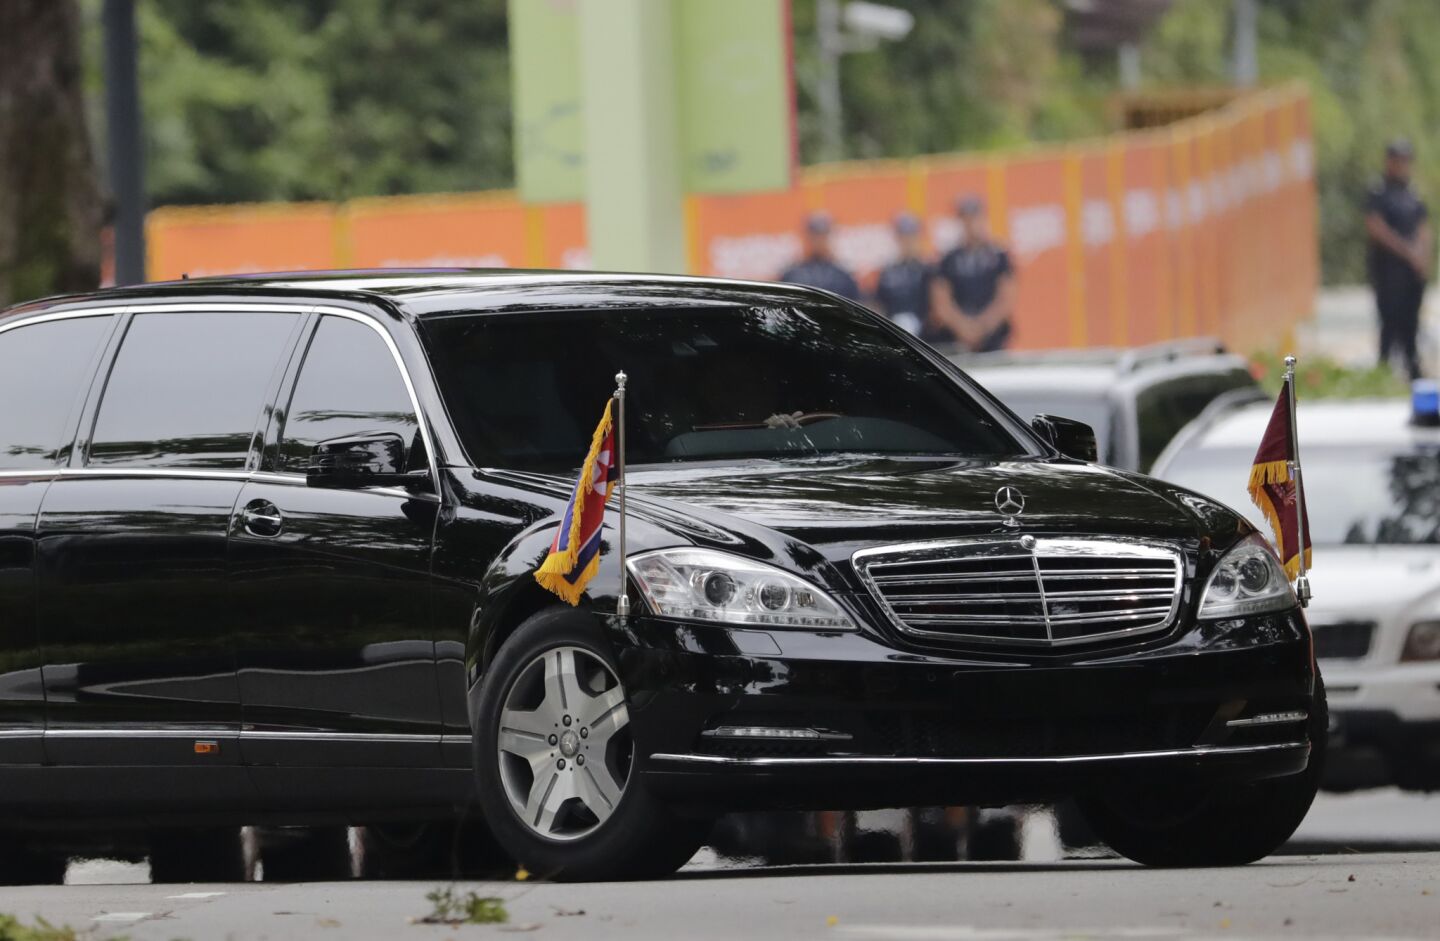 North Korean leader Kim Jong-un is driven into the Capella Hotel in Singapore to meet with U.S. President Trump.